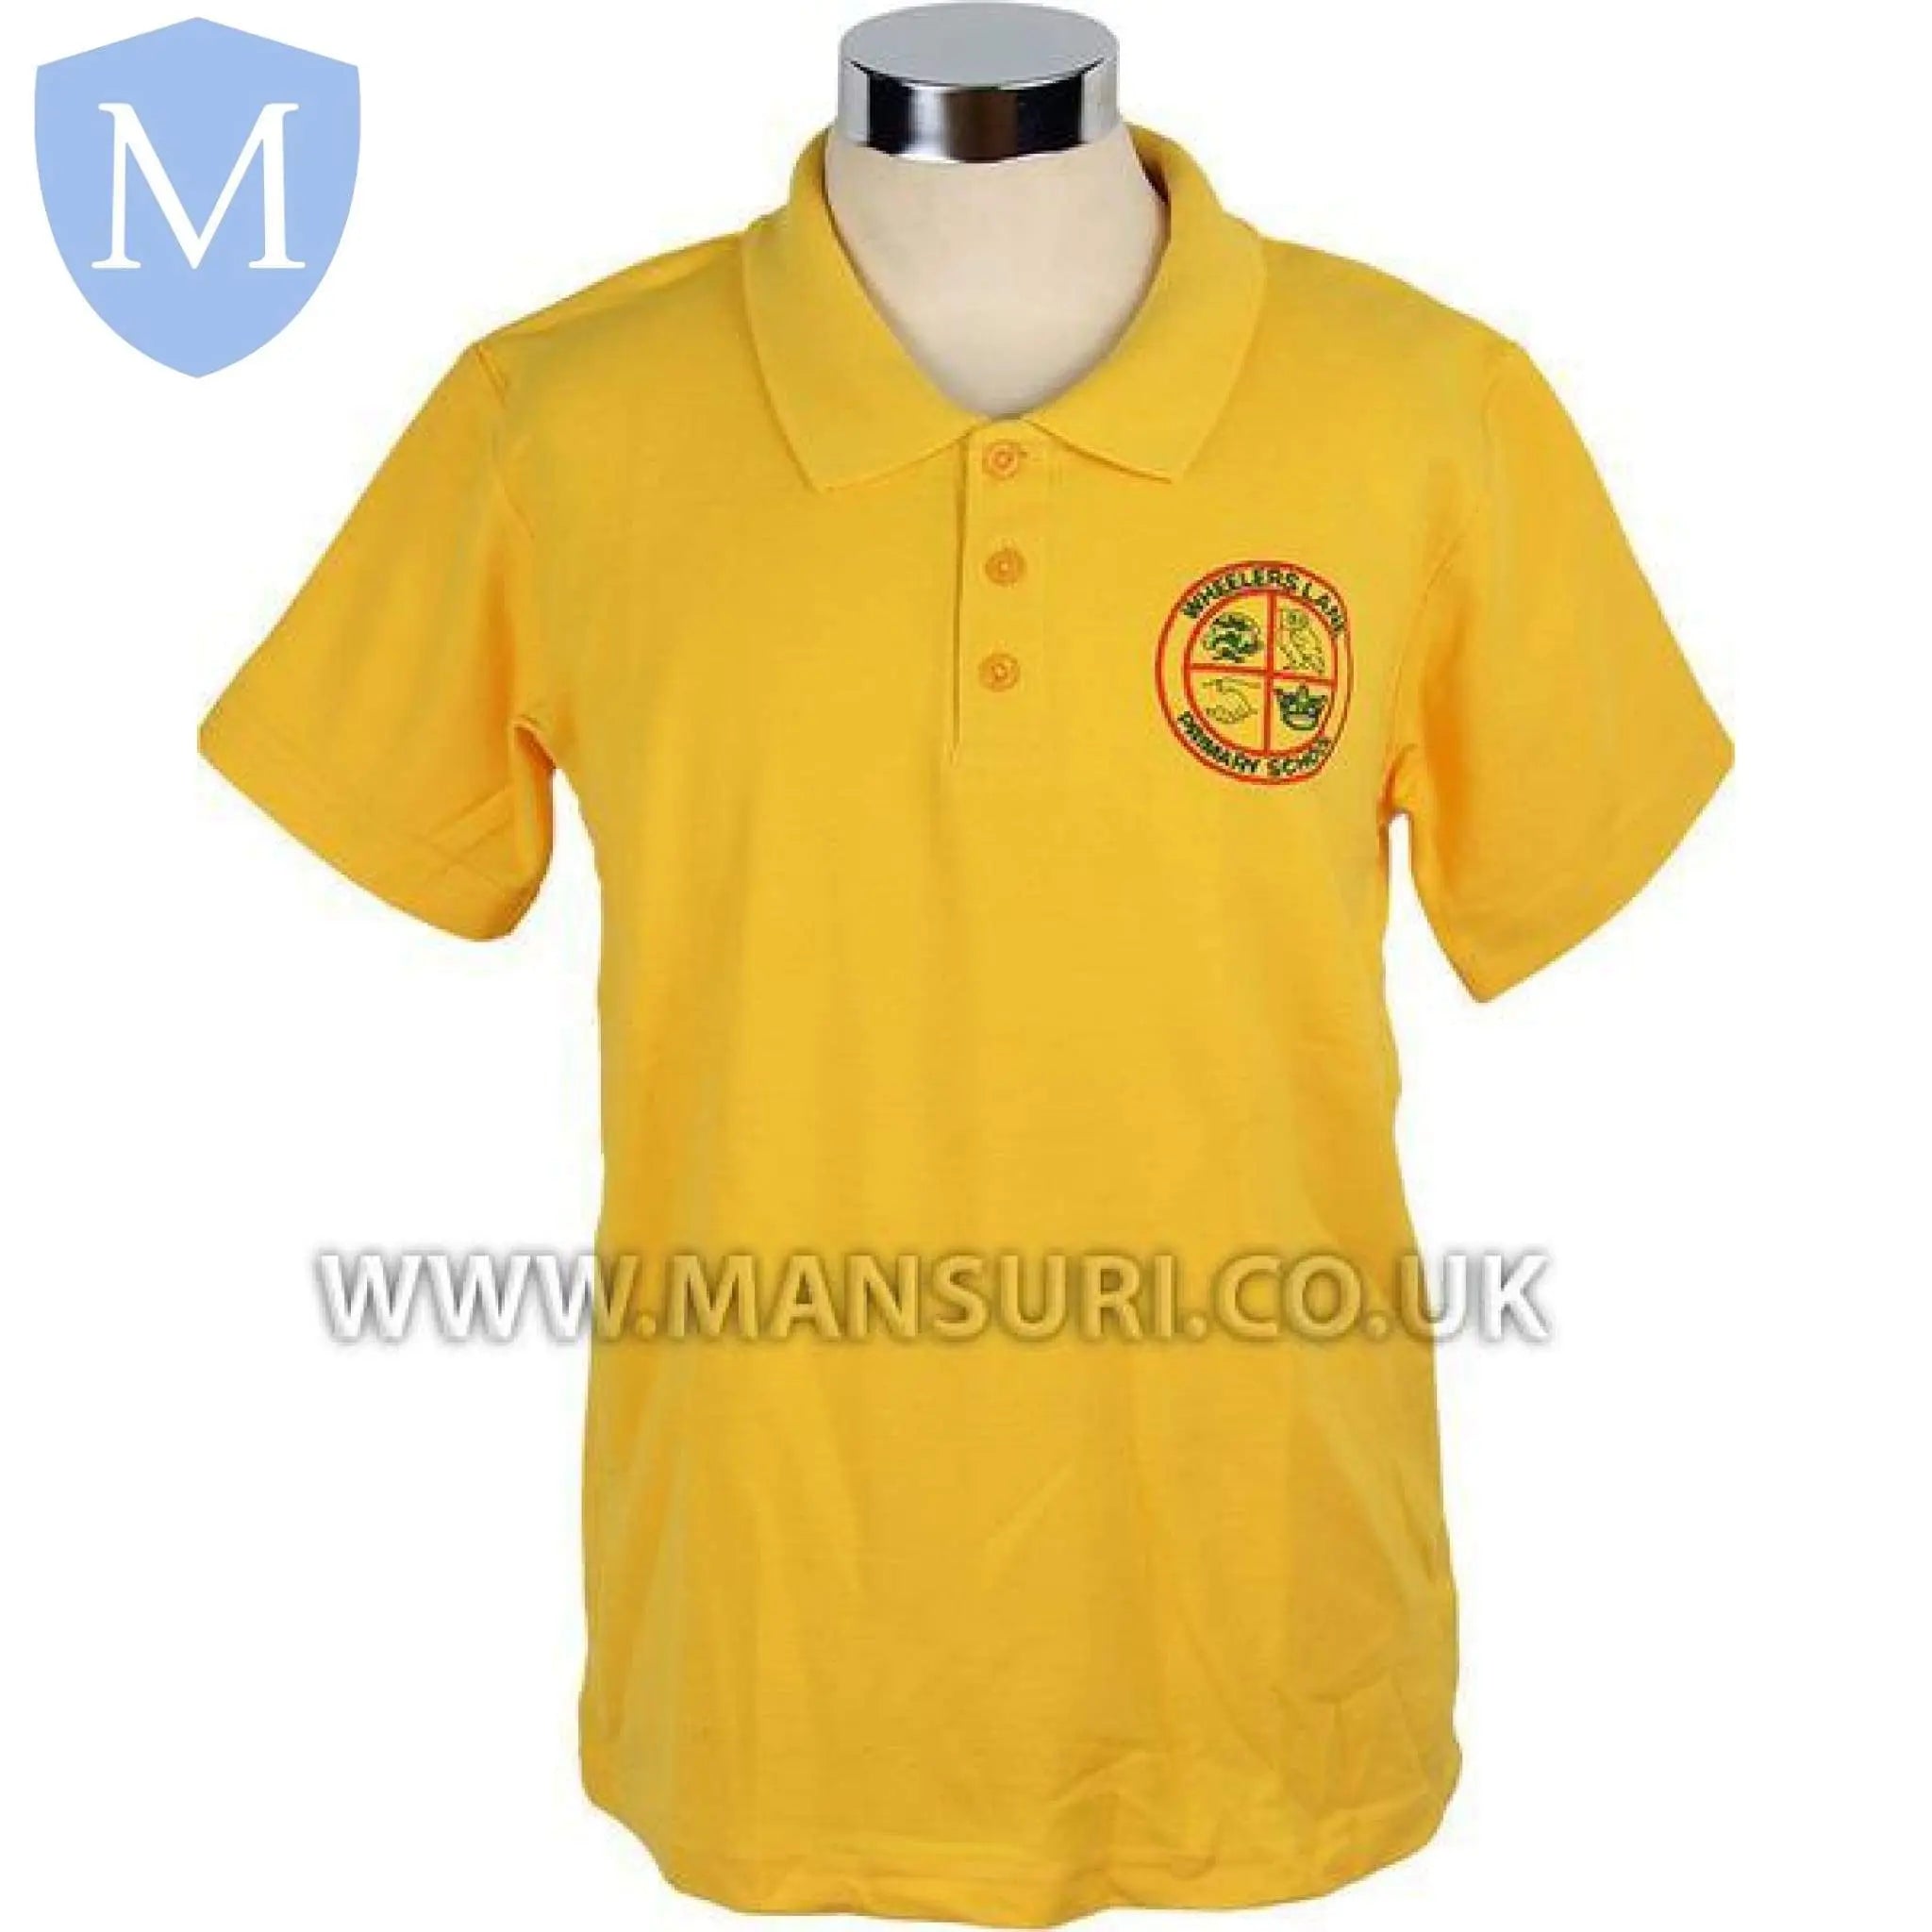 Wheelers Lane Polo Shirt Size 22 - 2 Years,Size 24 - 3-4 Years,Size 26 - 5-6 Years,Size 28 - 7-8 Years,Size 30 - 9-10 Years,Size 32 - 11-12 Years,Size 34 - 12-13 Years,Size 36,Size 38